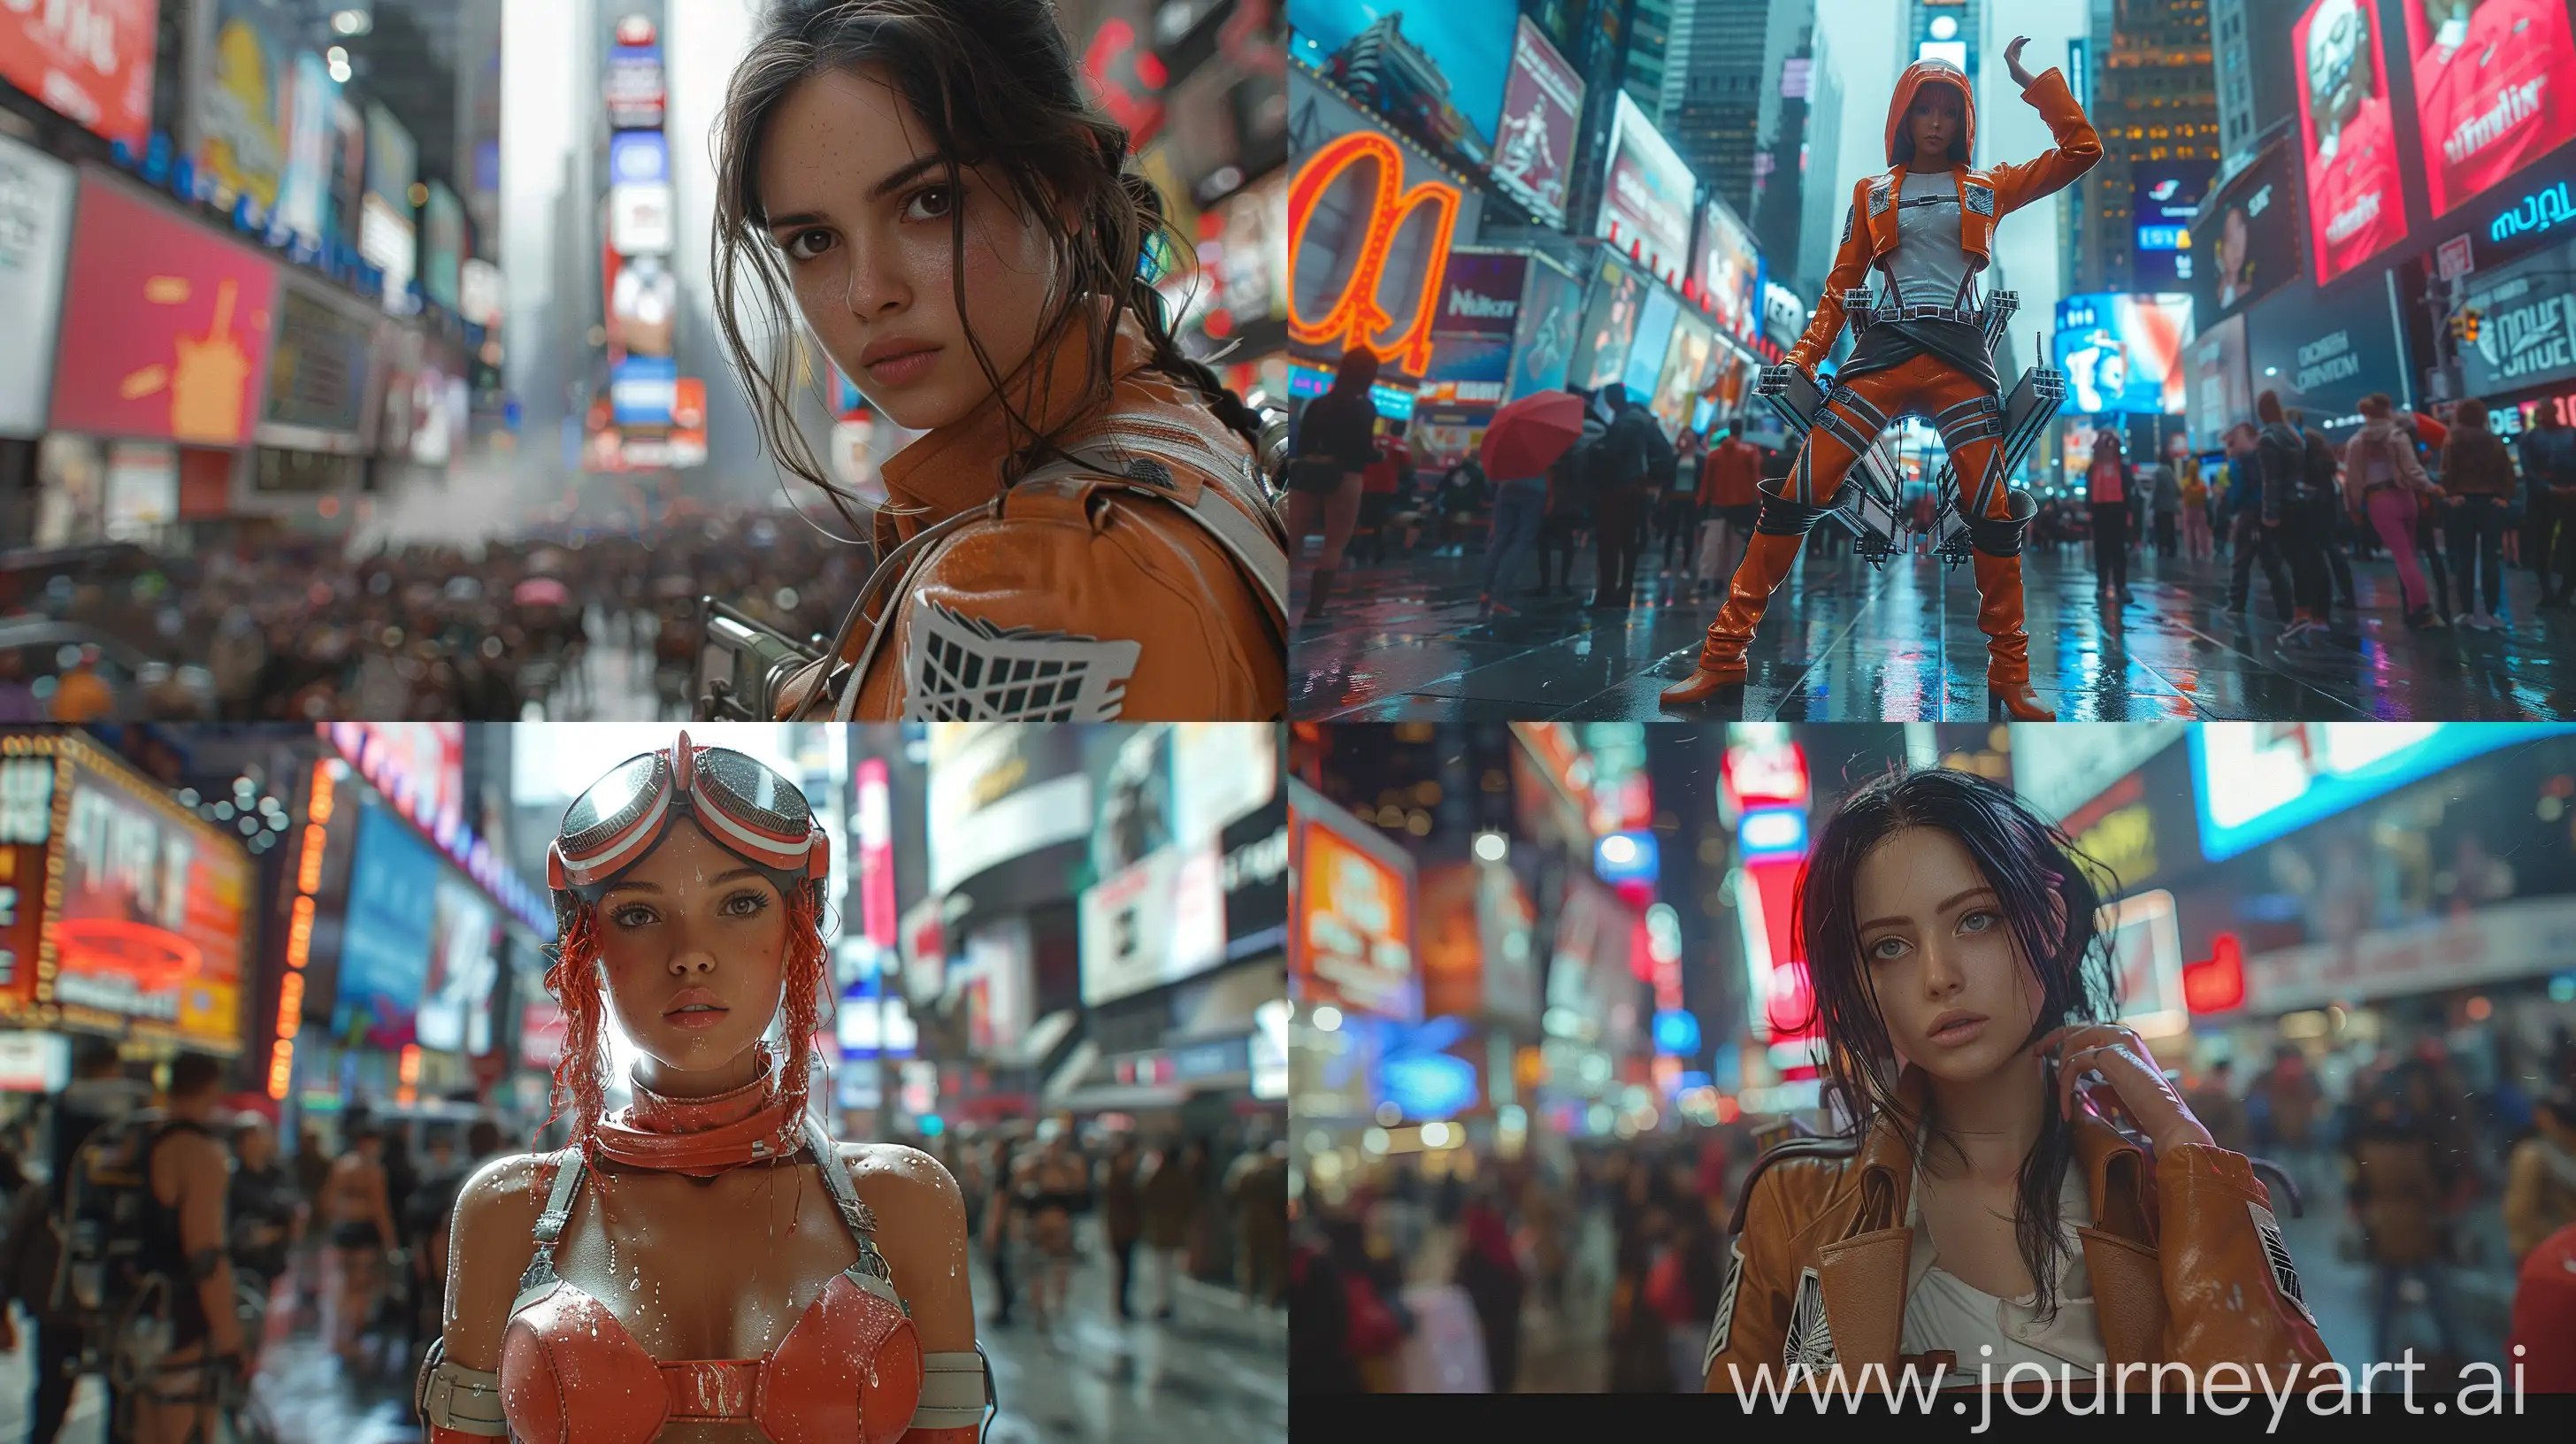 !mj1 Attack on Titan, titan female cosplayer in the heart of Times Square, New York City backdrop, bustling crowd, neon lights, urban, hyper-realistic textures, detailed costume, dynamic pose, dusk lighting, cinematic --ar 16:9 --s 700 --v 6